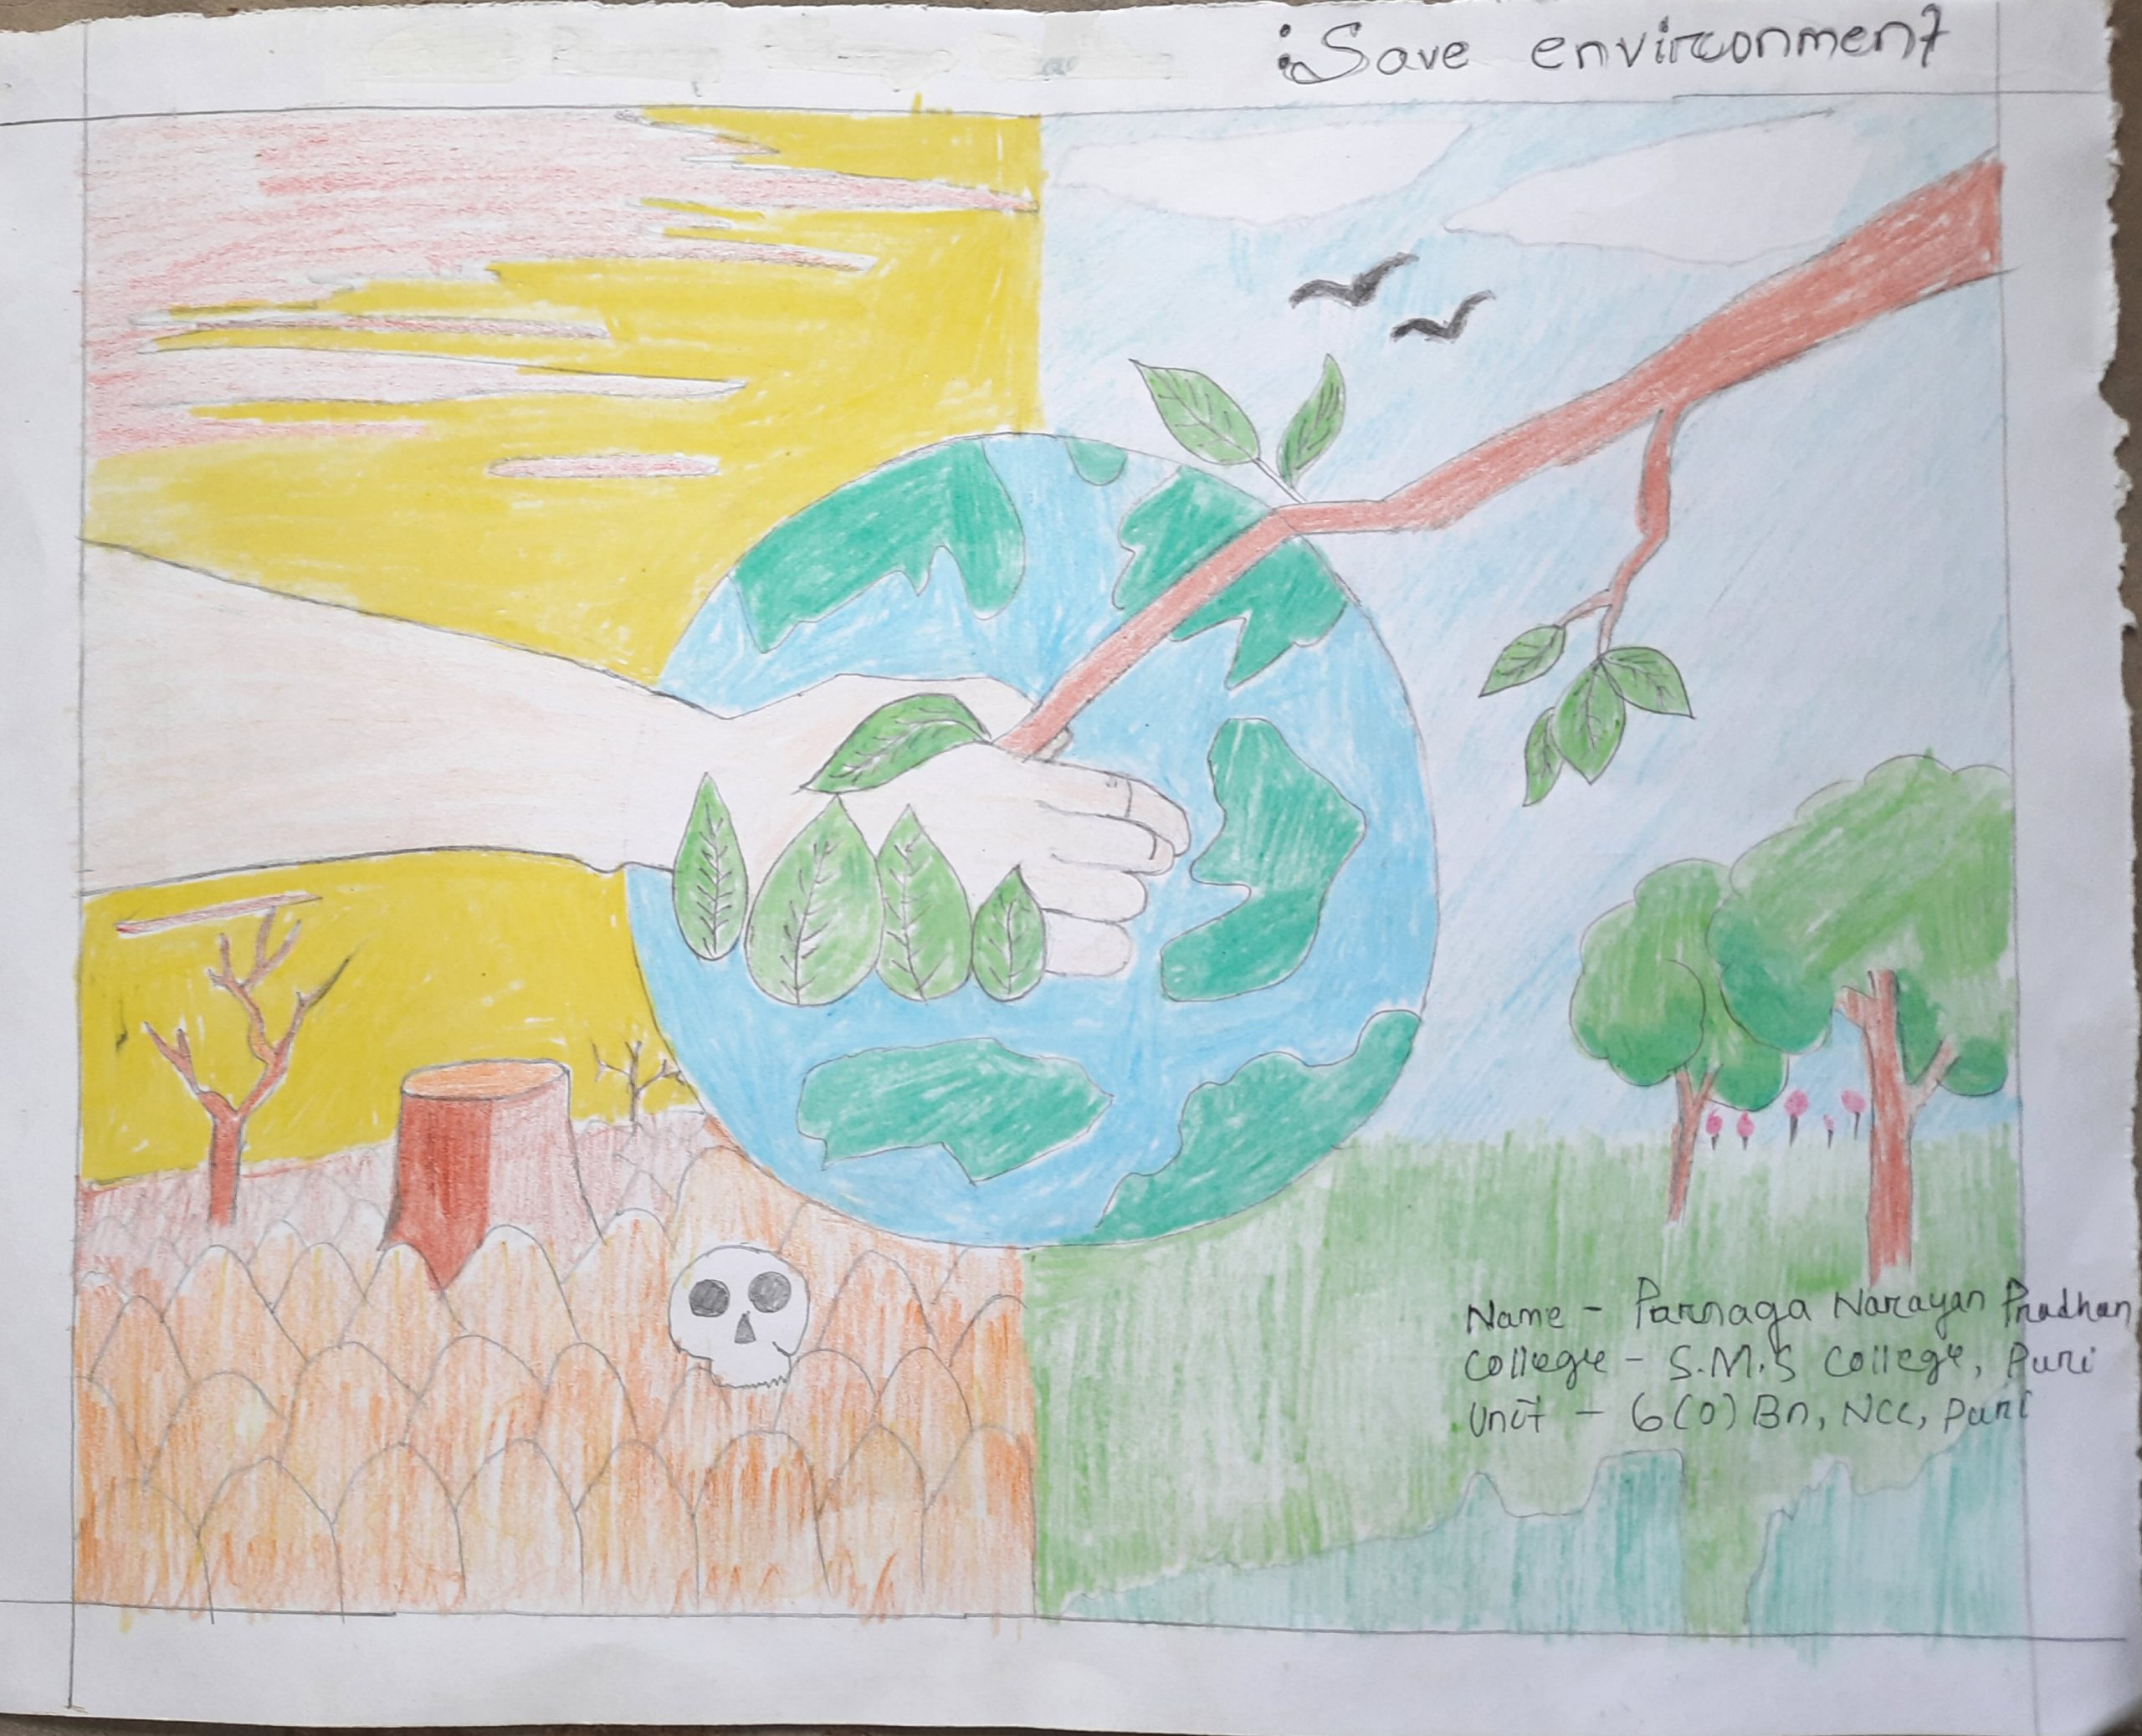 Home - Kids Care About Climate Change 2021